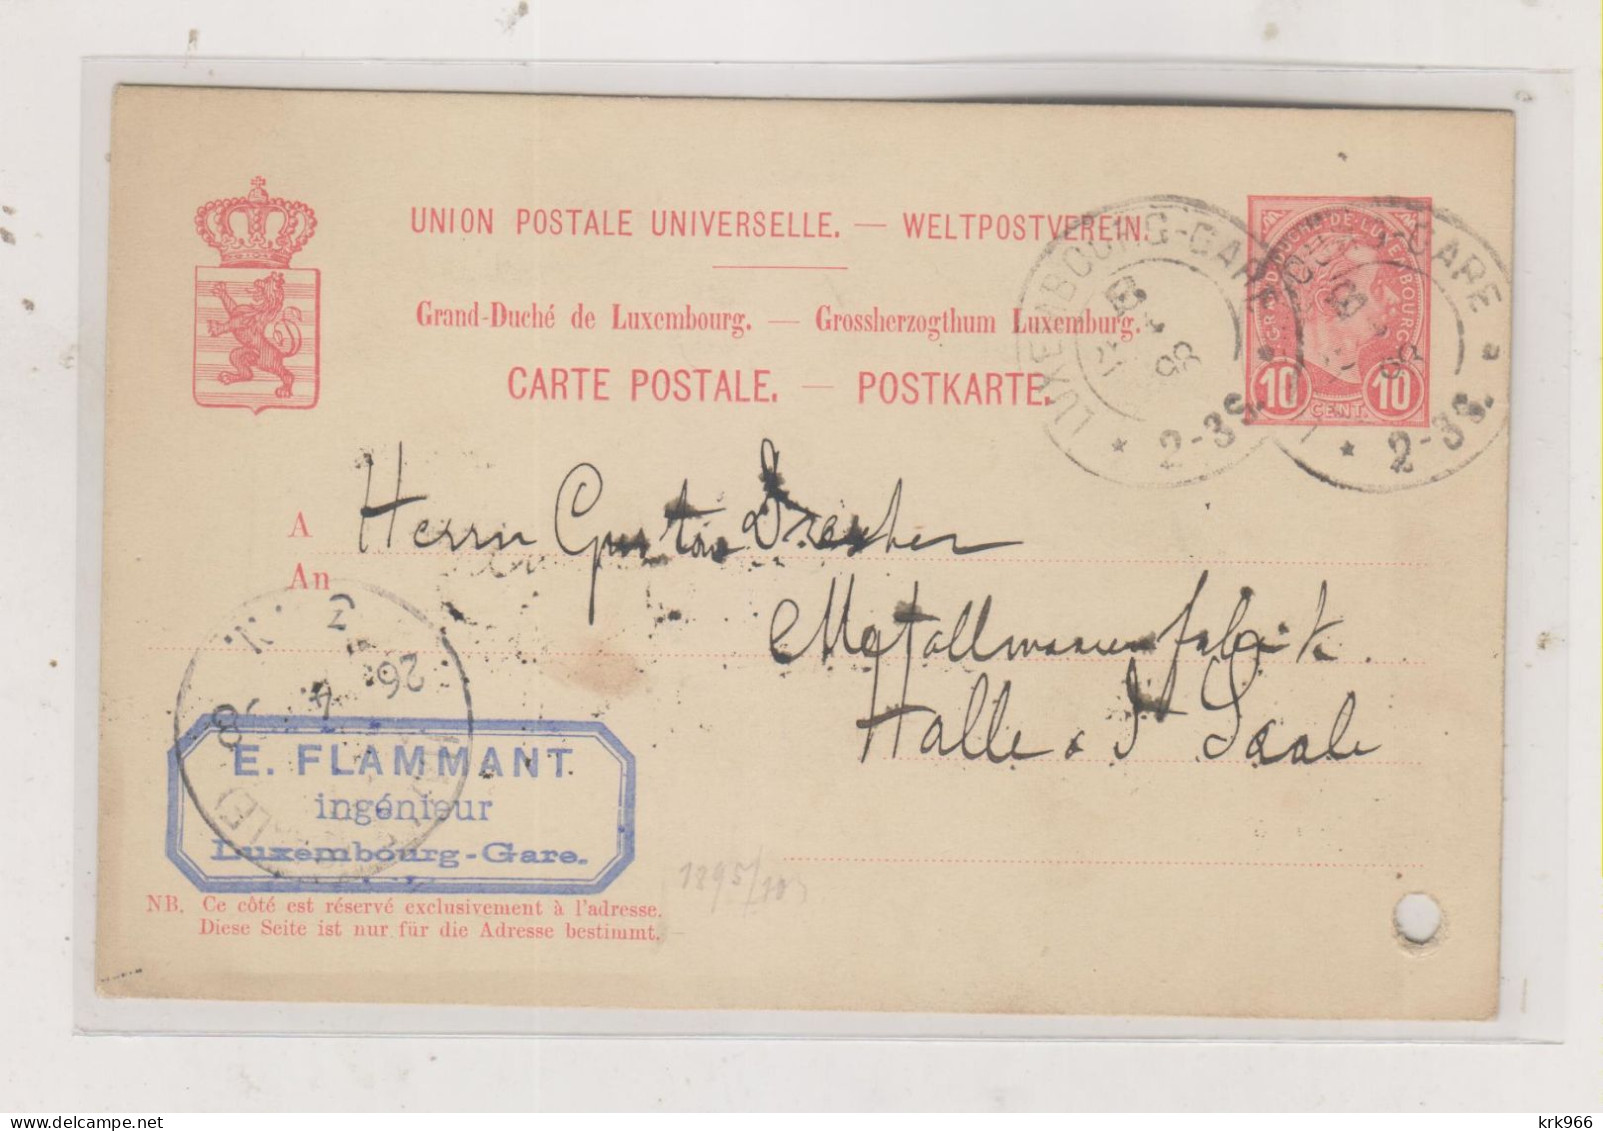 LUXEMBOURG 1898 Nice Postal Stationery To Germany - Stamped Stationery